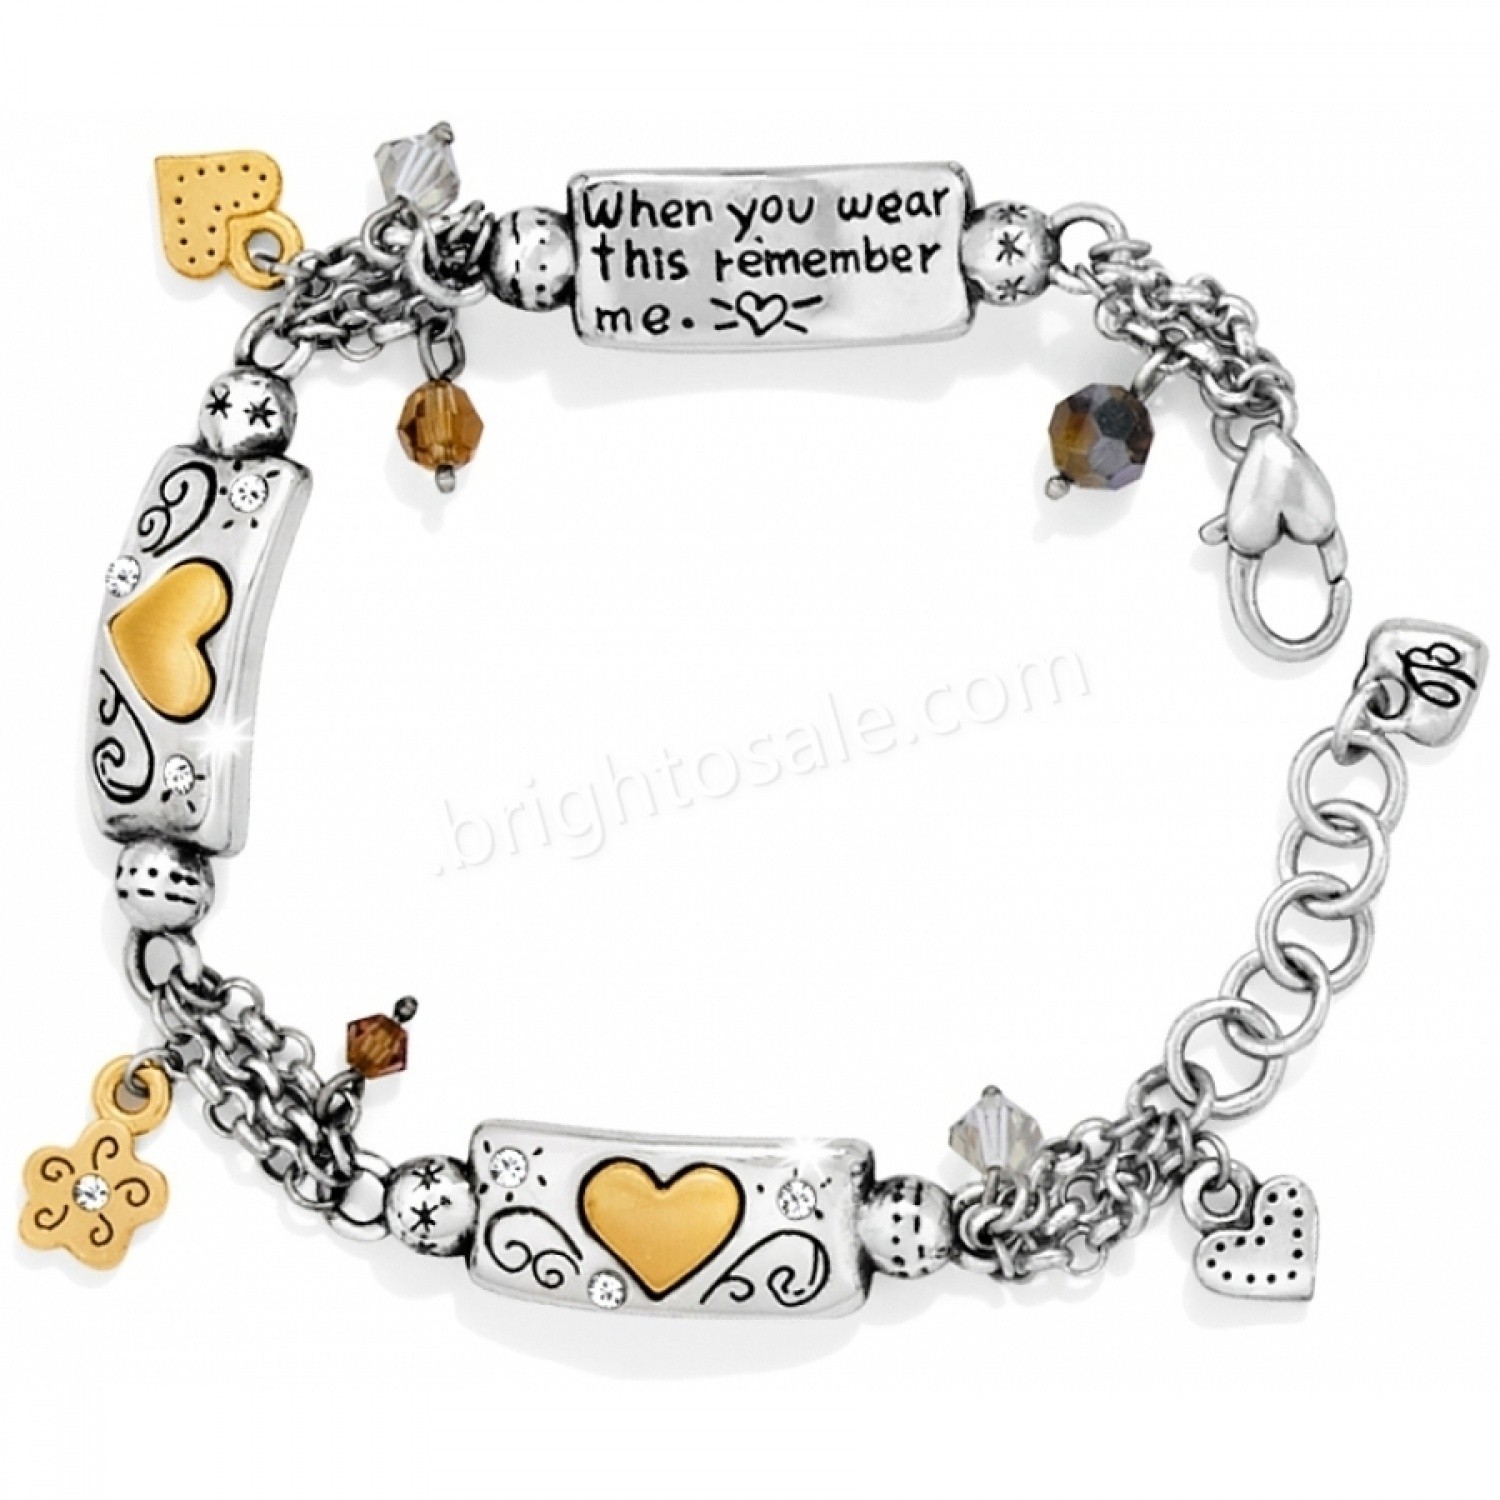 Brighton Collectibles & Online Discount Remember Your Heart Bracelet - Brighton Collectibles & Online Discount Remember Your Heart Bracelet